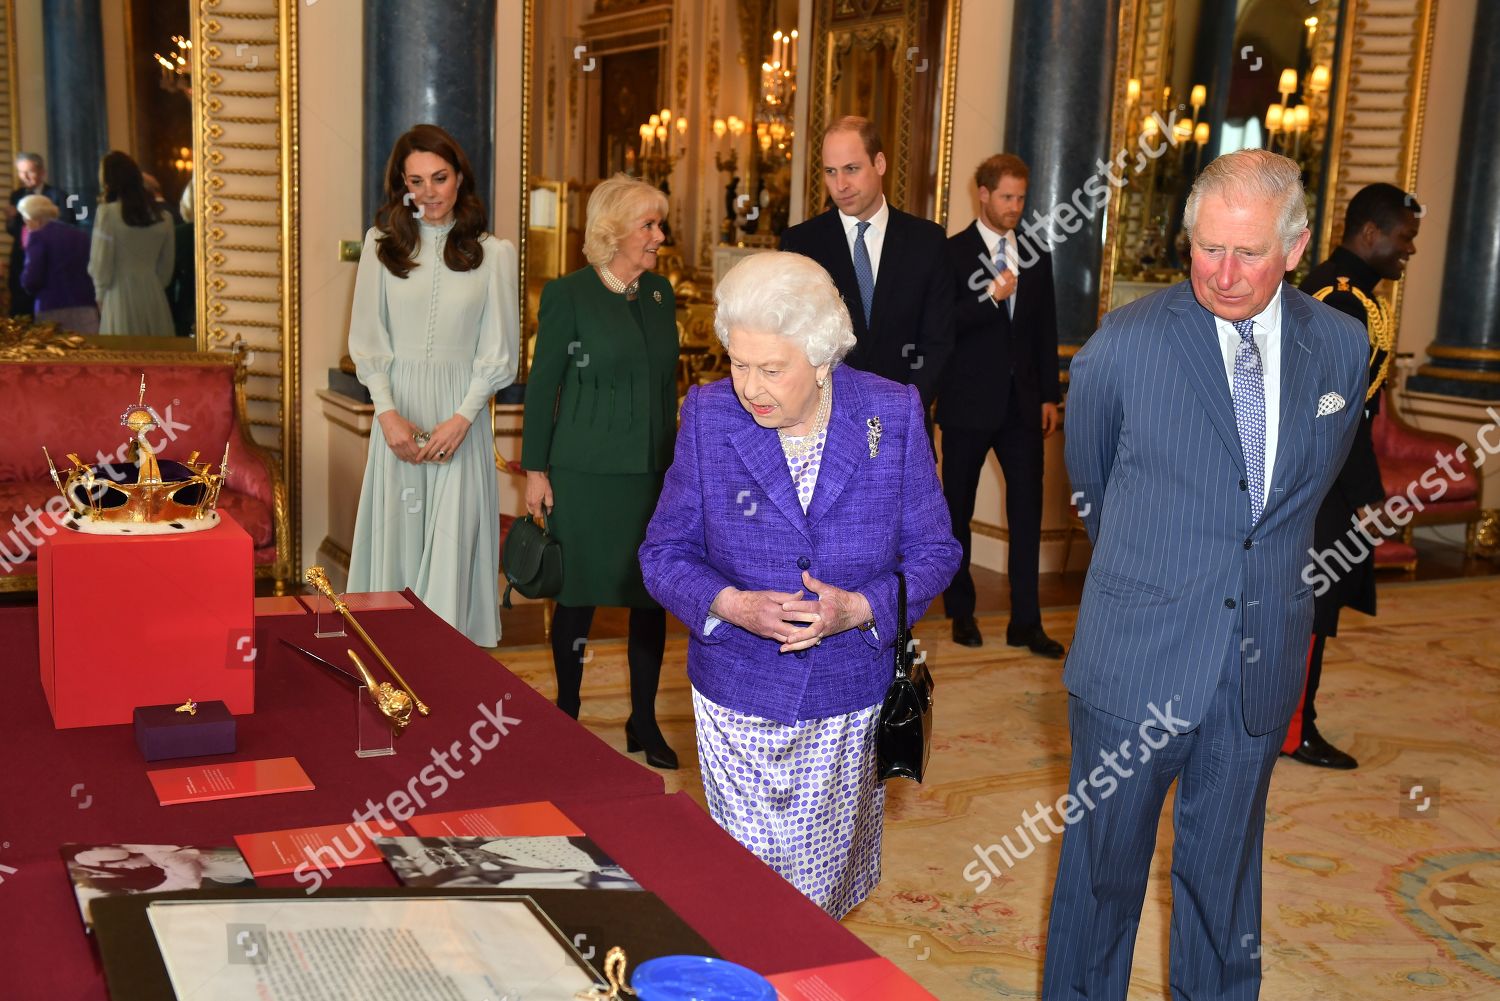 CASA REAL BRITÁNICA - Página 19 50th-anniversary-of-the-investiture-of-prince-charles-buckingham-palace-london-uk-shutterstock-editorial-10139995o